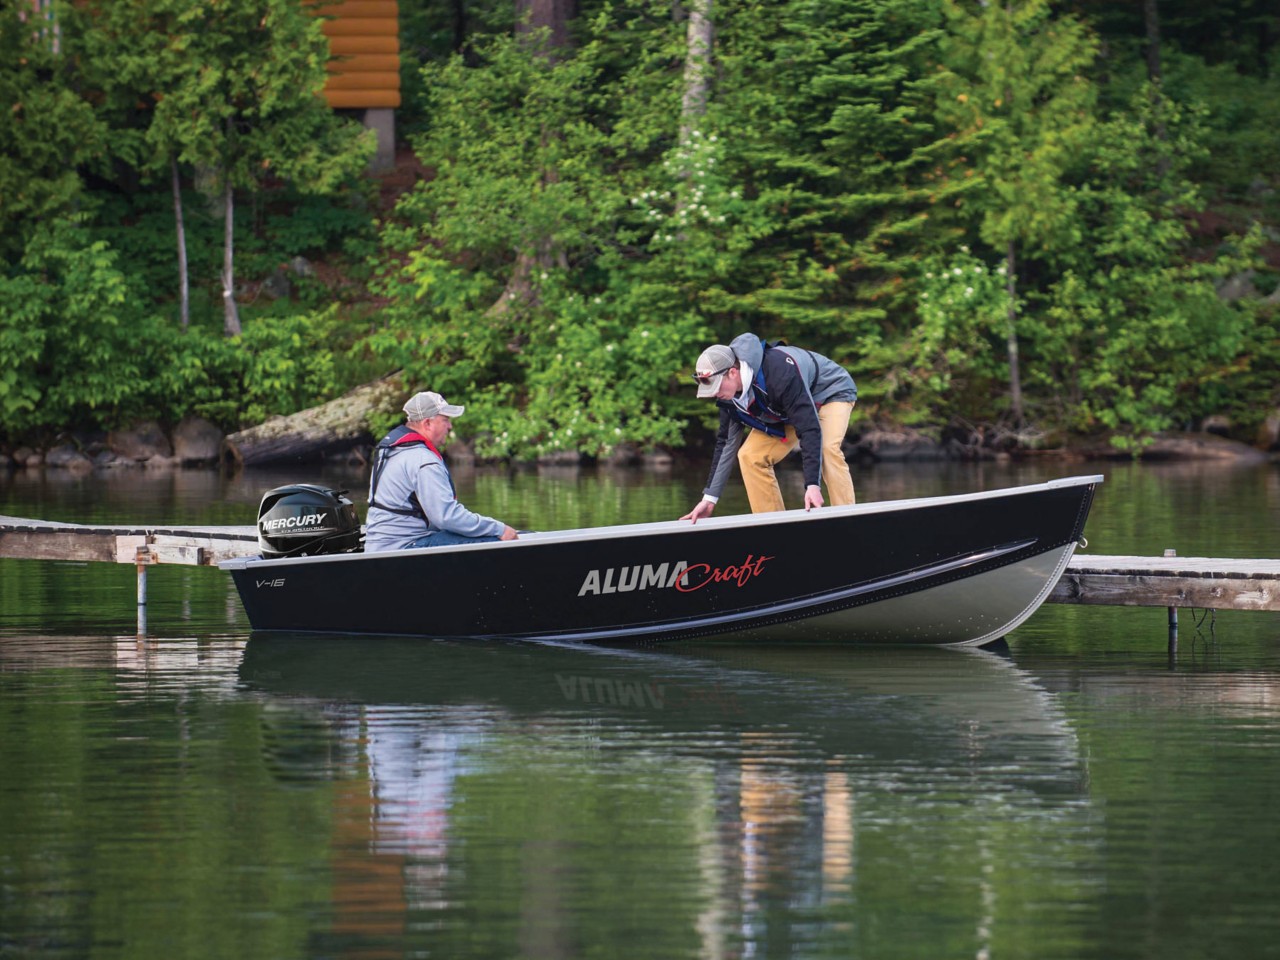 The Best in Fishing, Hunting and Boating Gear